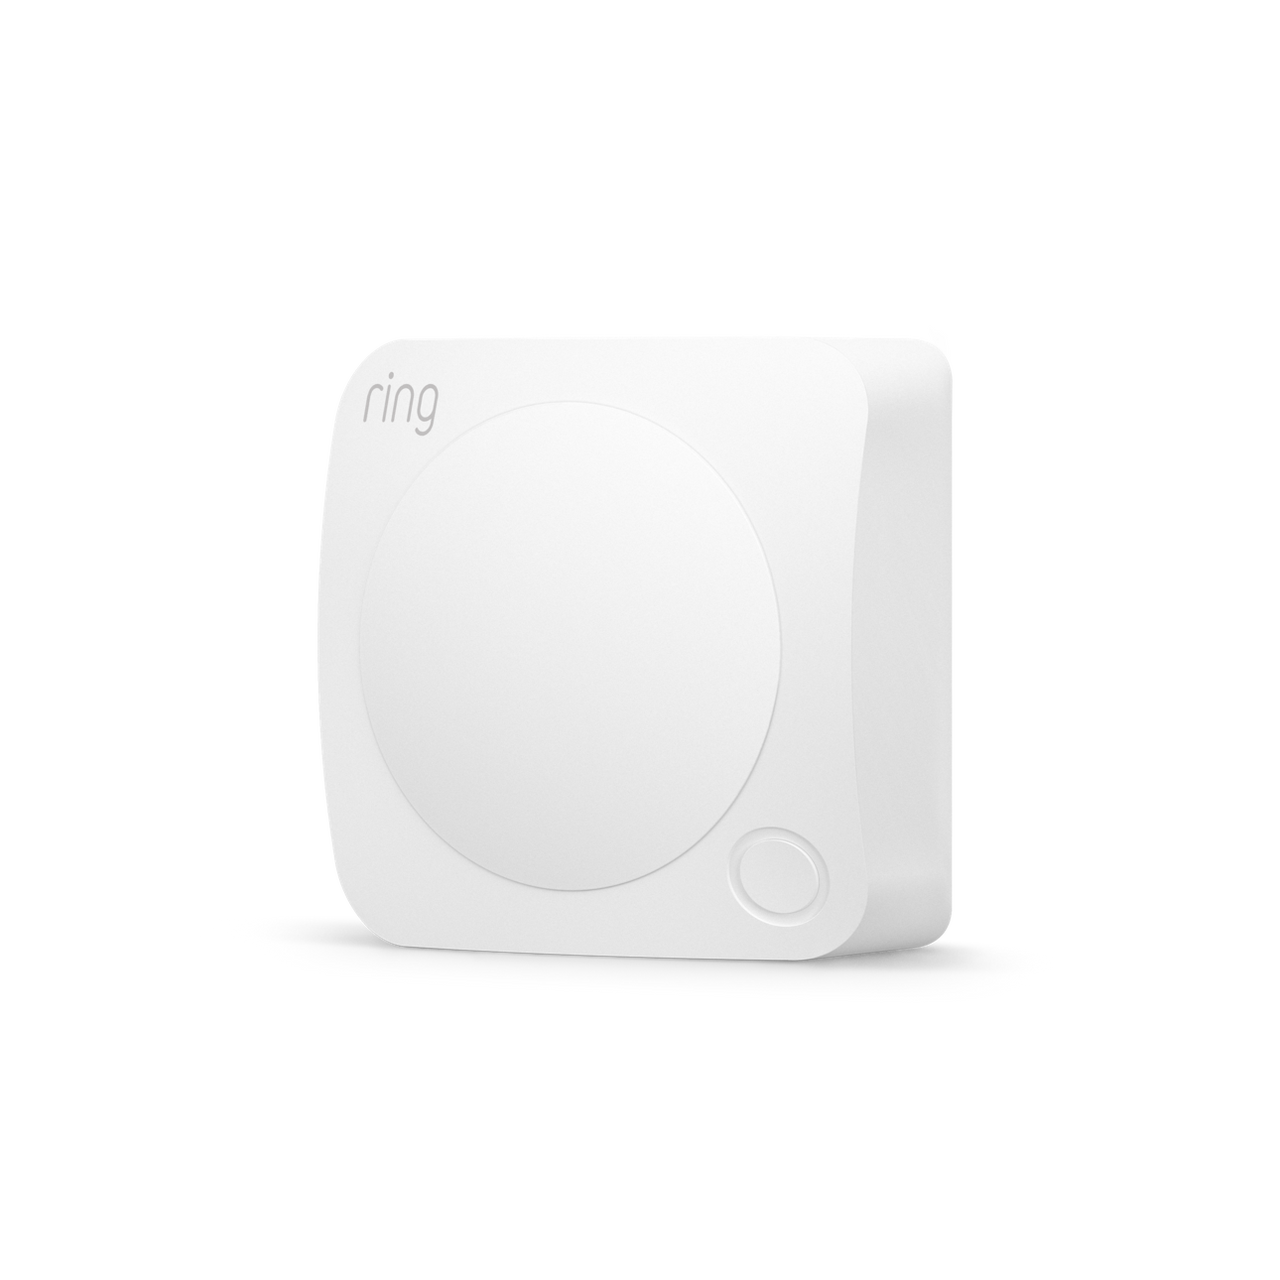 products/Alarm2.0-MotionDetector_angled_1290x1290_757afffe-c2ec-46ae-a1cd-32d034fcf502.png